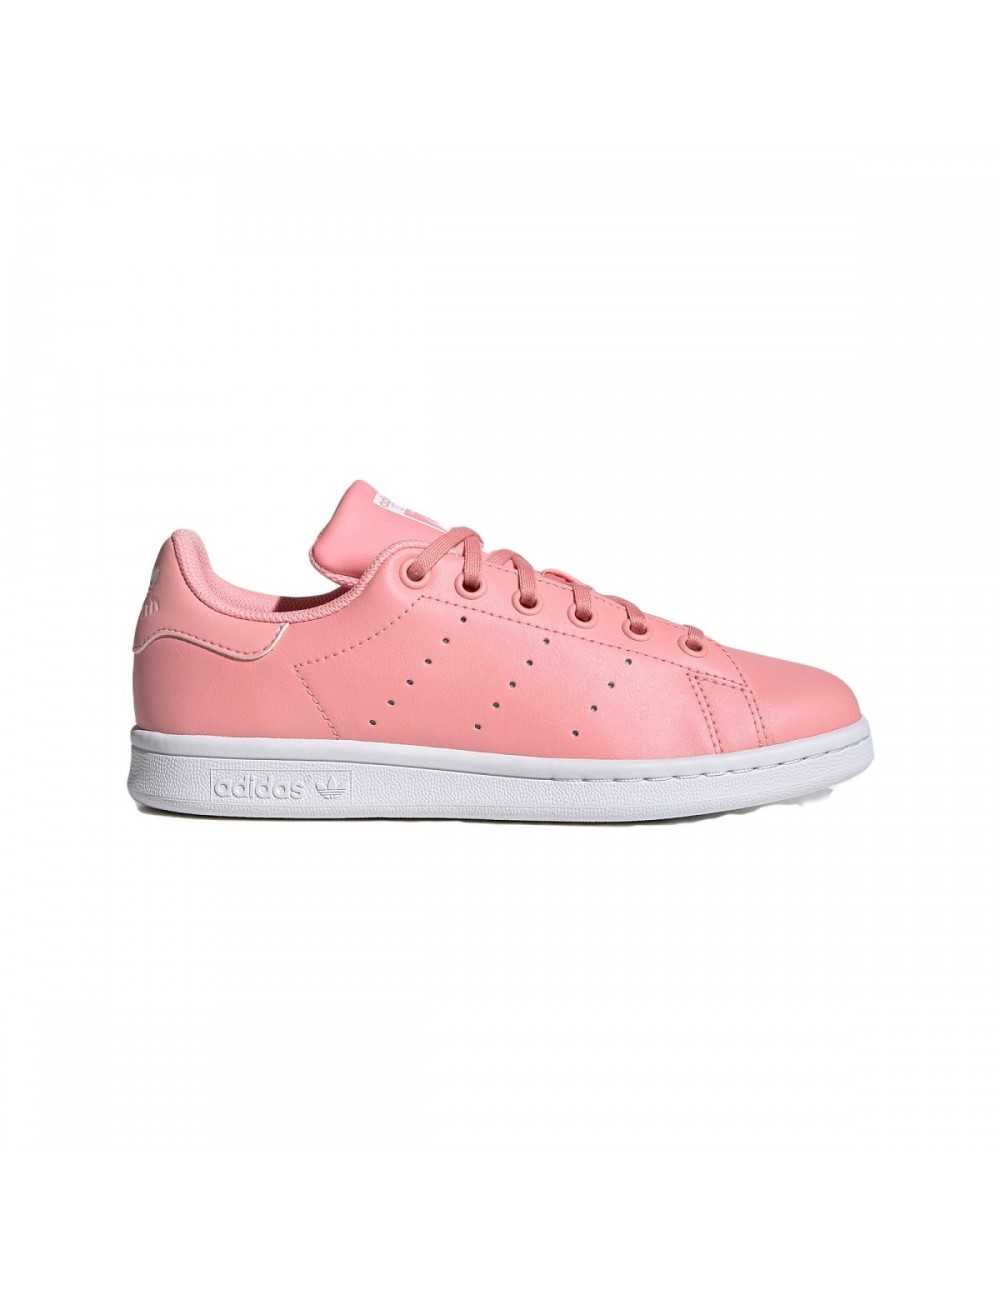 adidas donna sneakers rosa